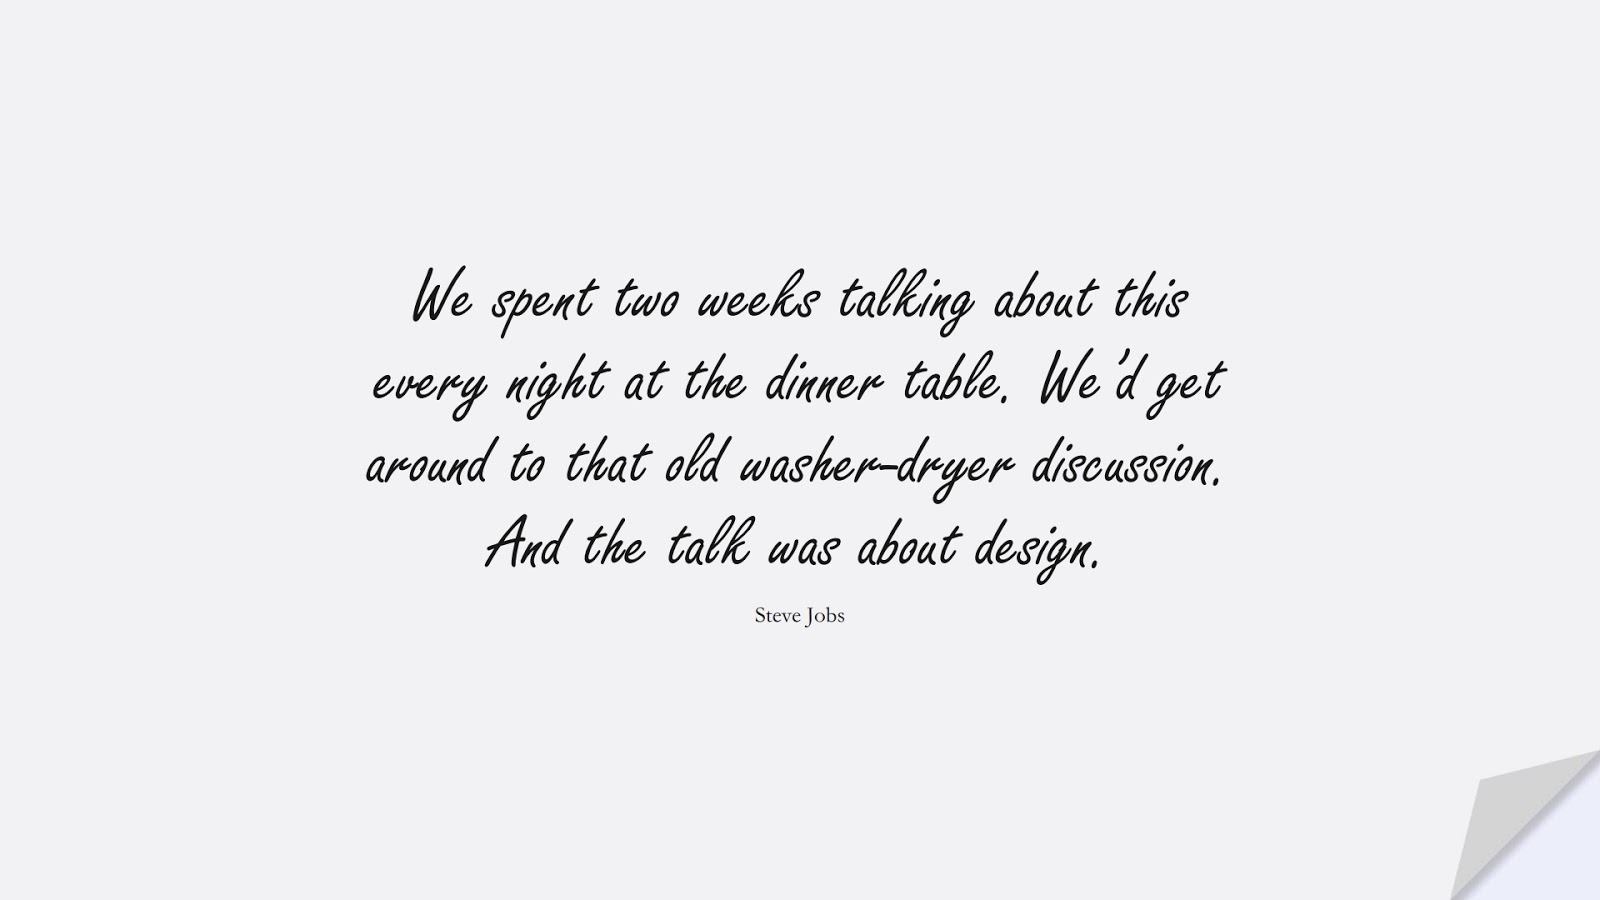 We spent two weeks talking about this every night at the dinner table. We’d get around to that old washer-dryer discussion. And the talk was about design. (Steve Jobs);  #SteveJobsQuotes